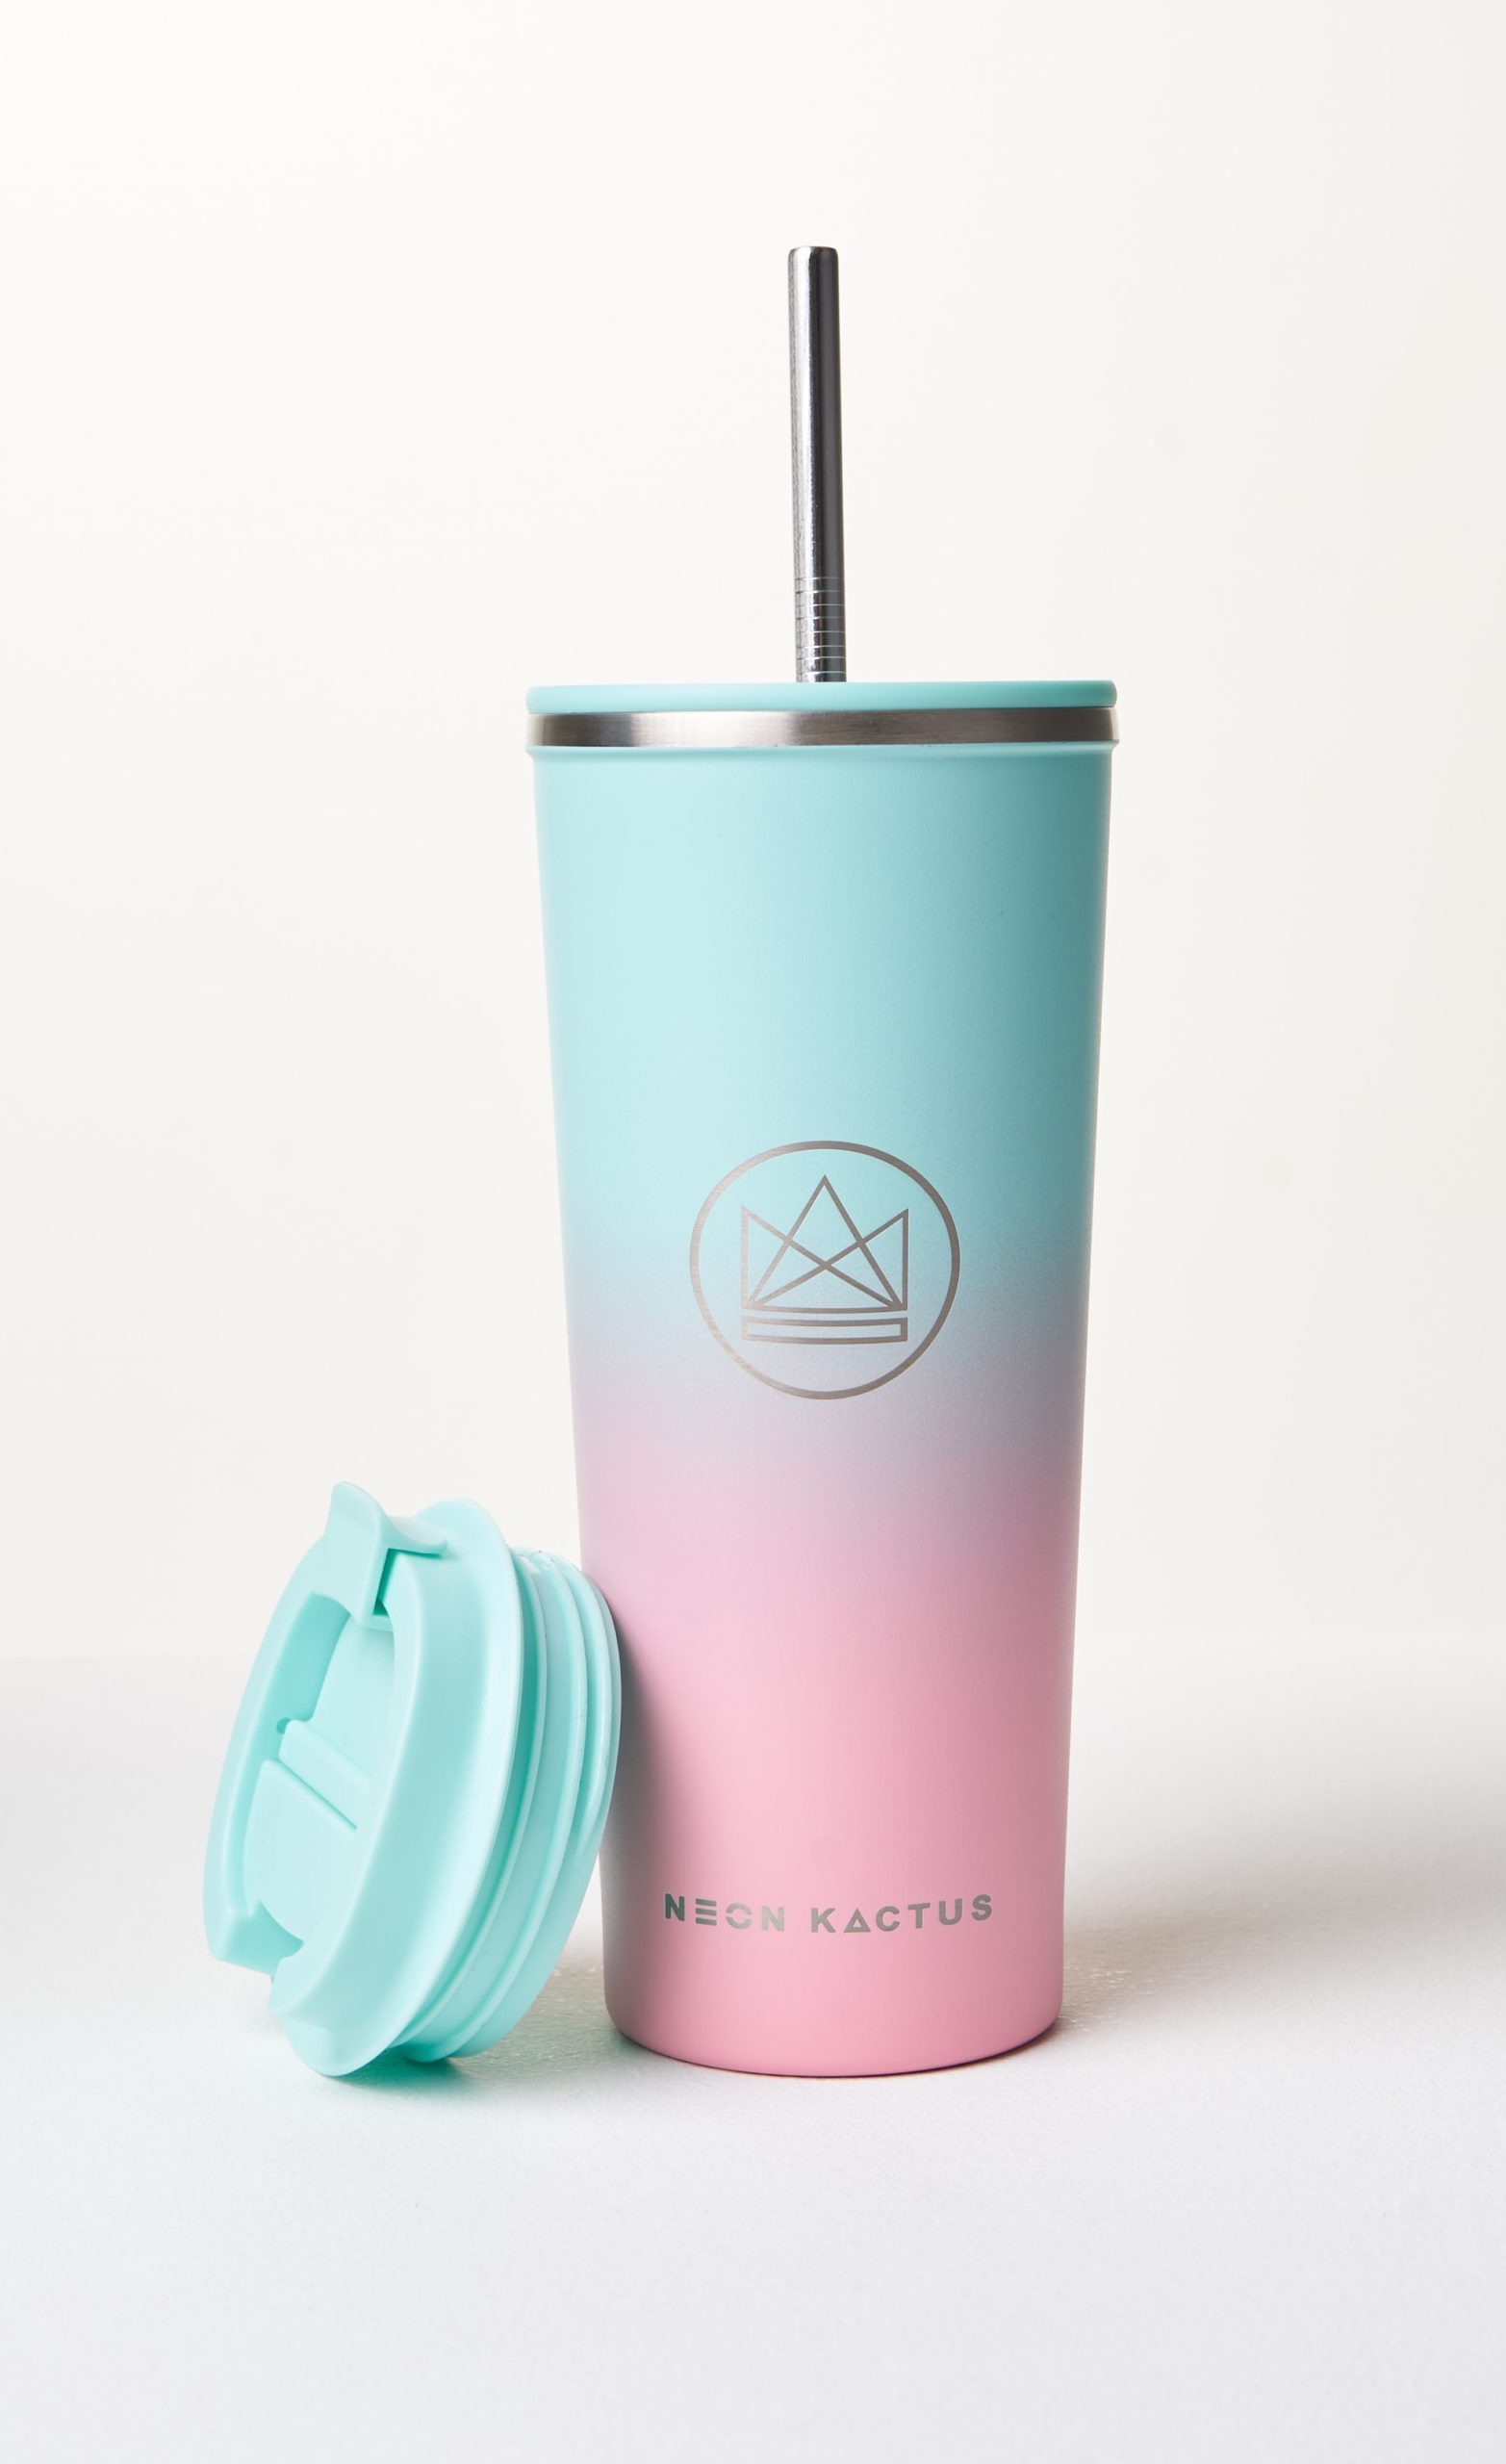 24 oz. Pink & Blue Reusable Plastic Tumbler with Lid & Straw